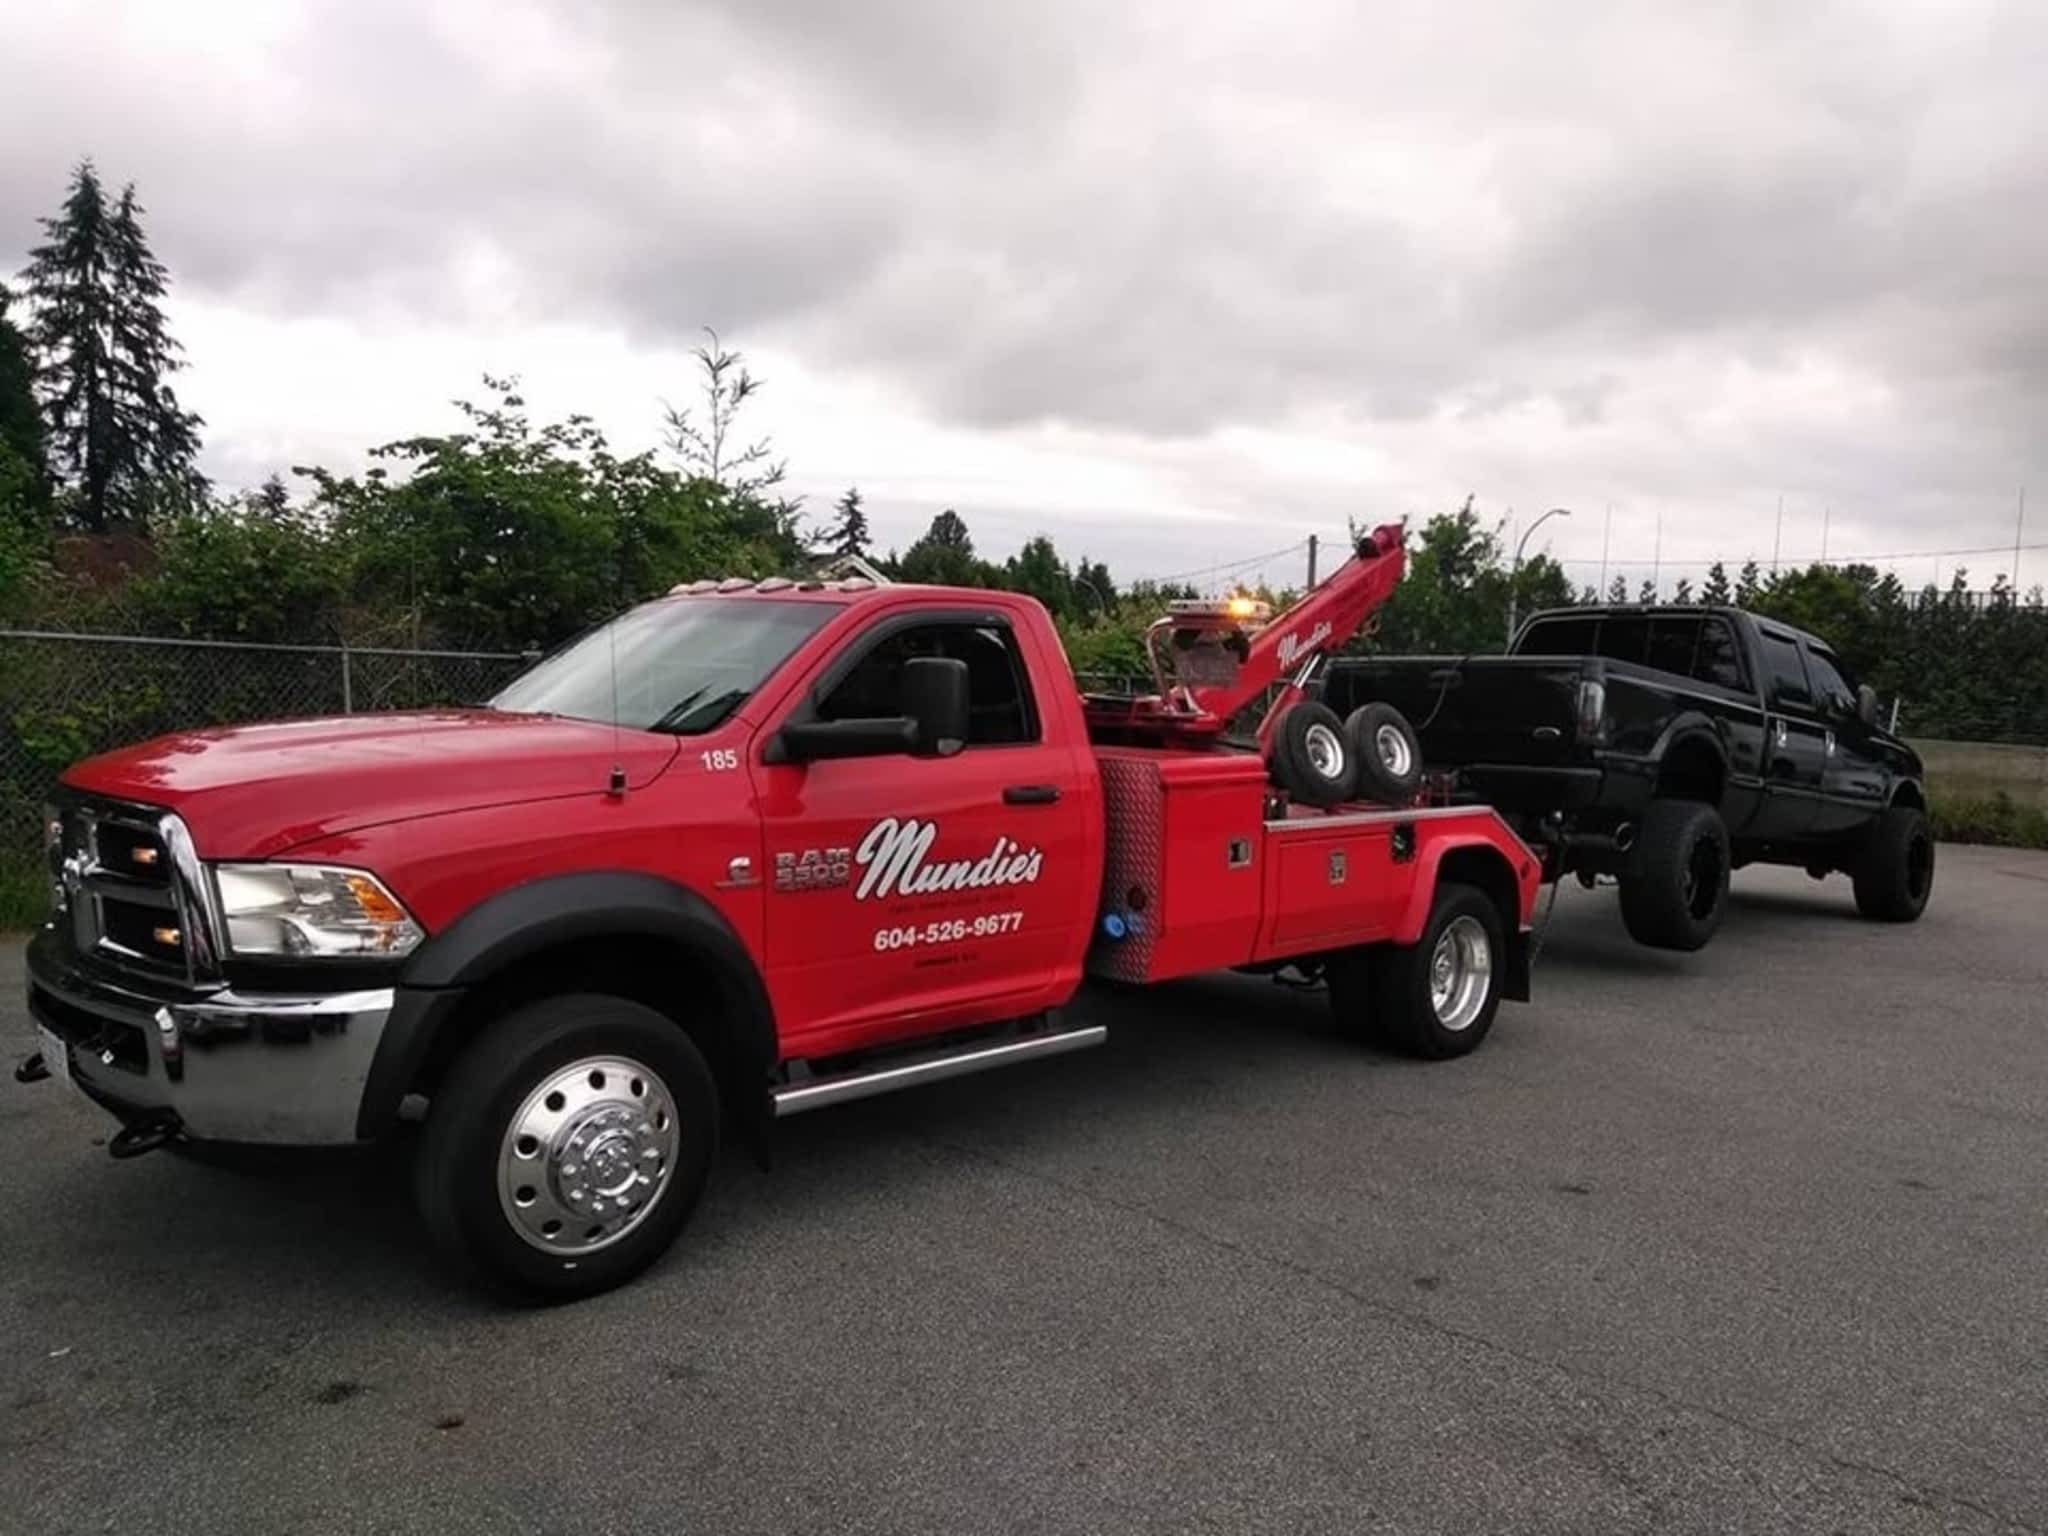 photo Mundies Towing and Recovery